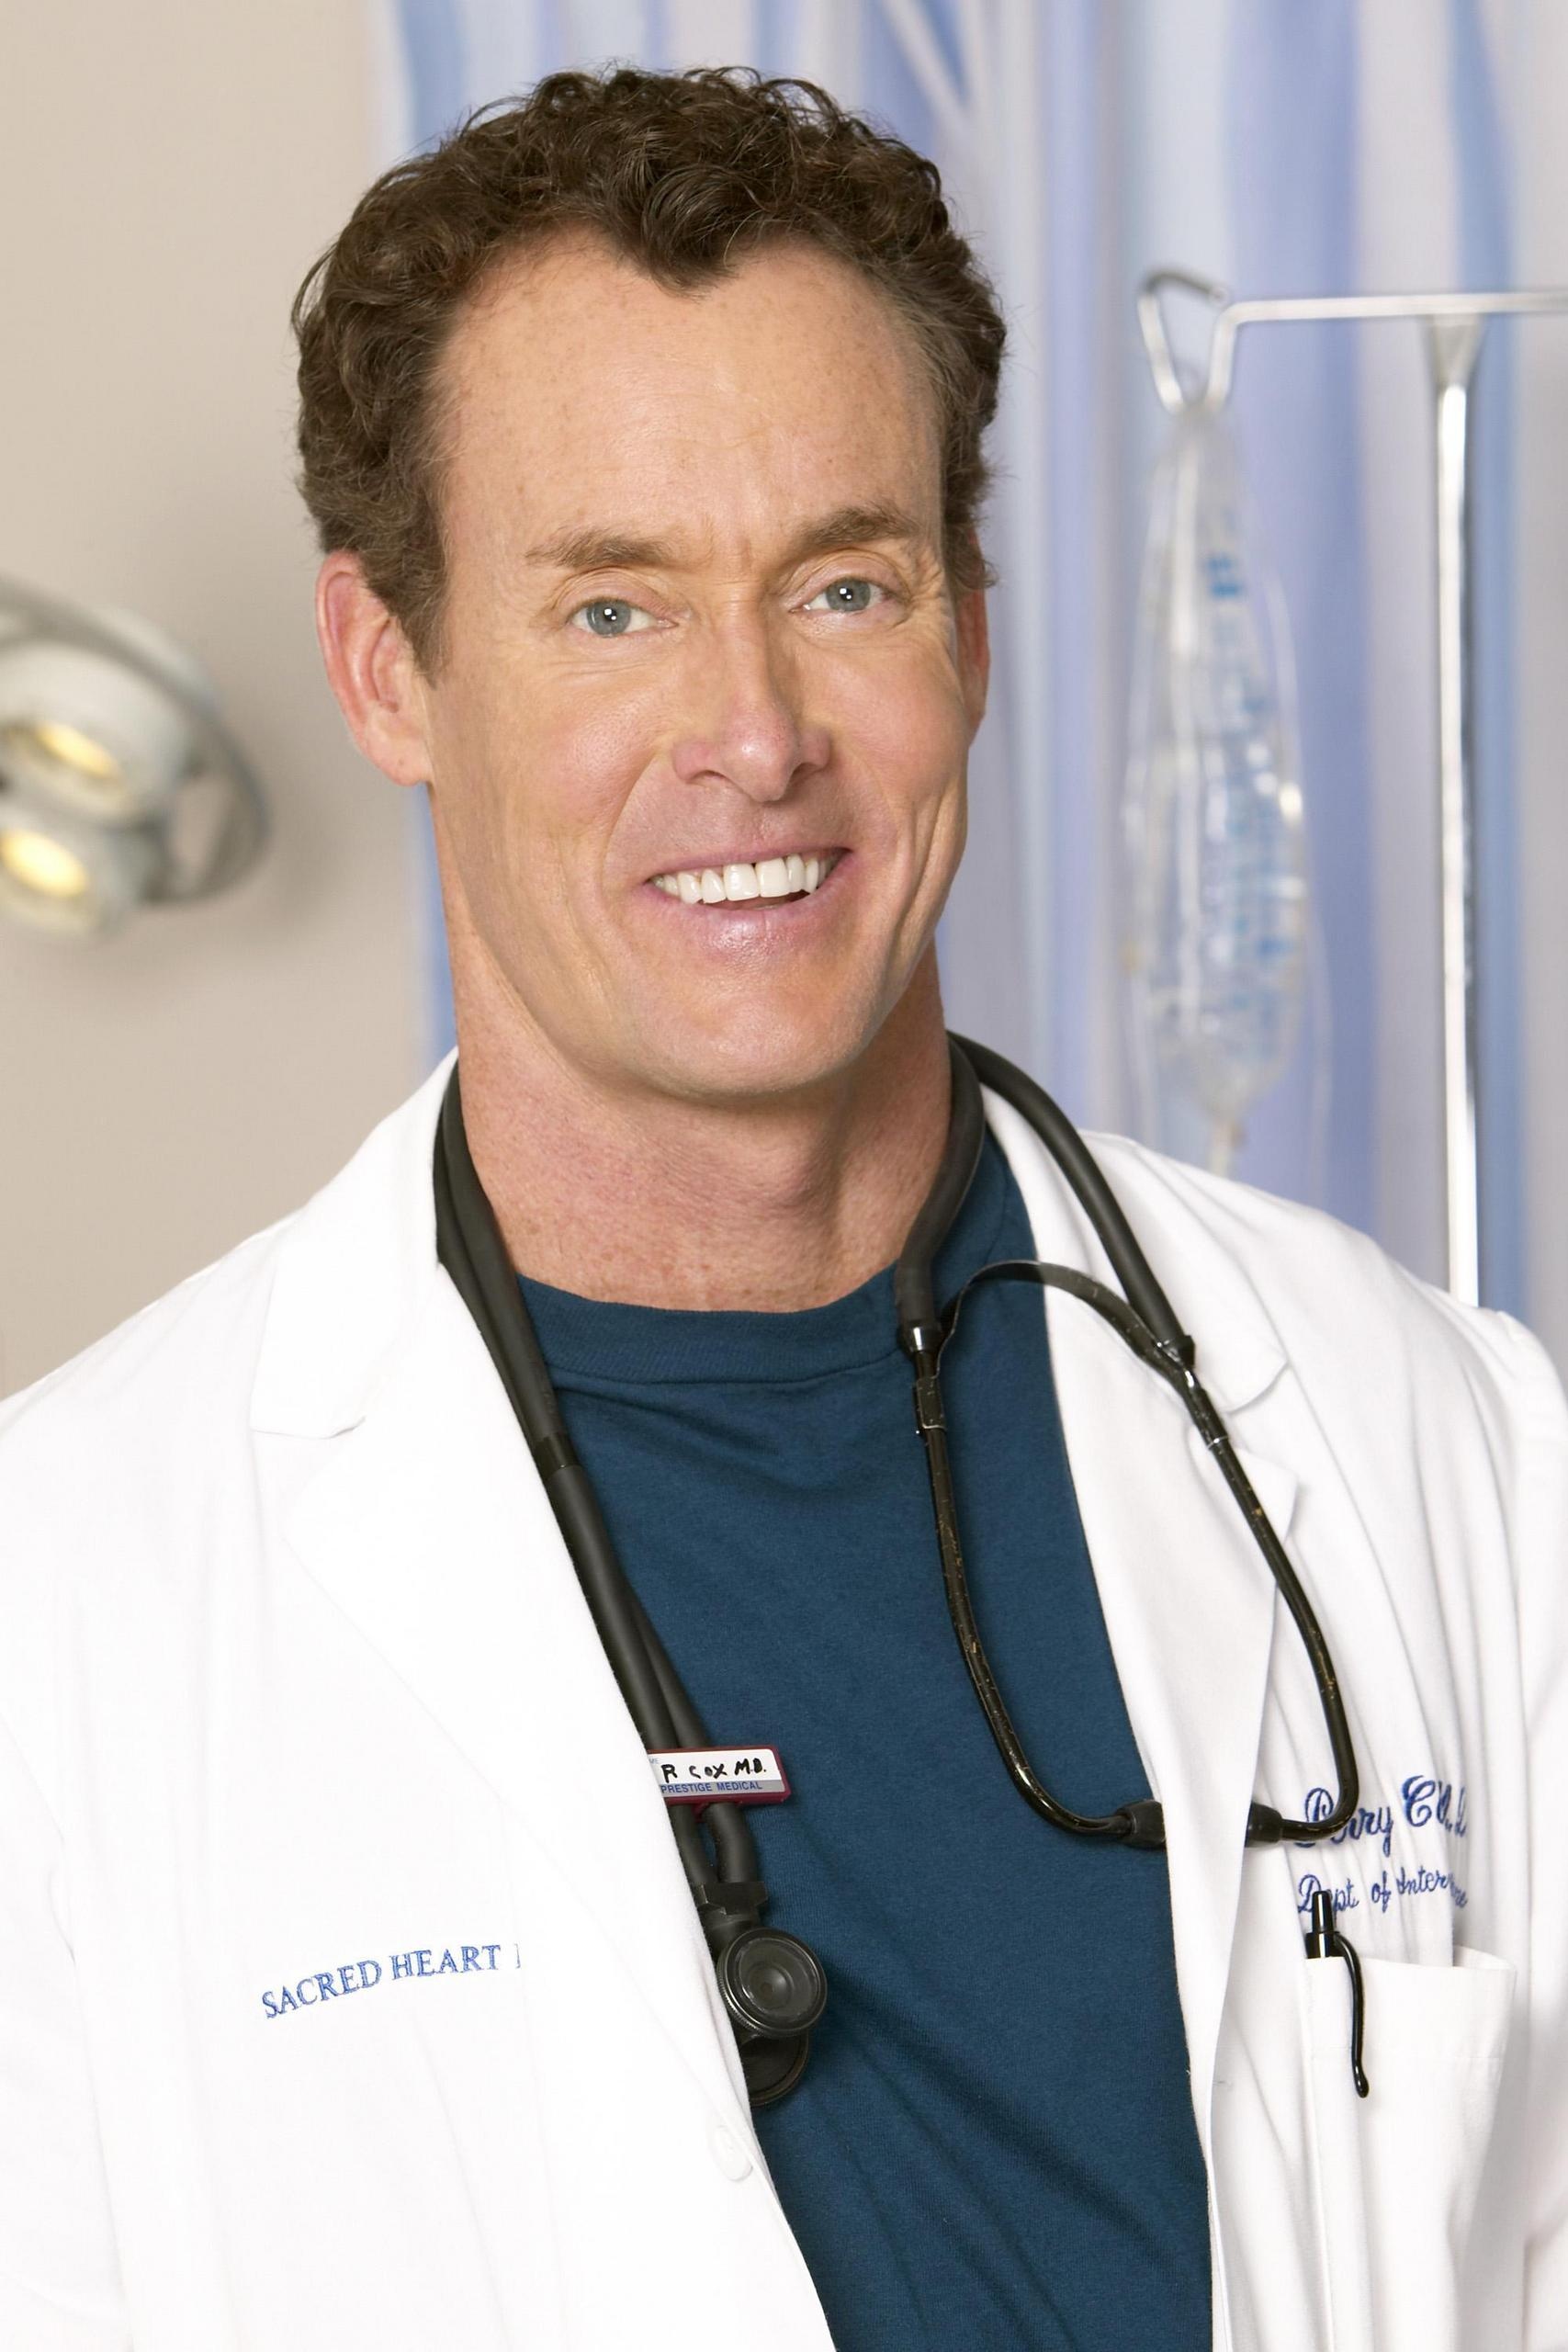 Scrubs (TV Series): John C. McGinley, Percival Ulysses “Perry” Cox, A sarcastic, cynical, misanthrope. 1710x2560 HD Background.